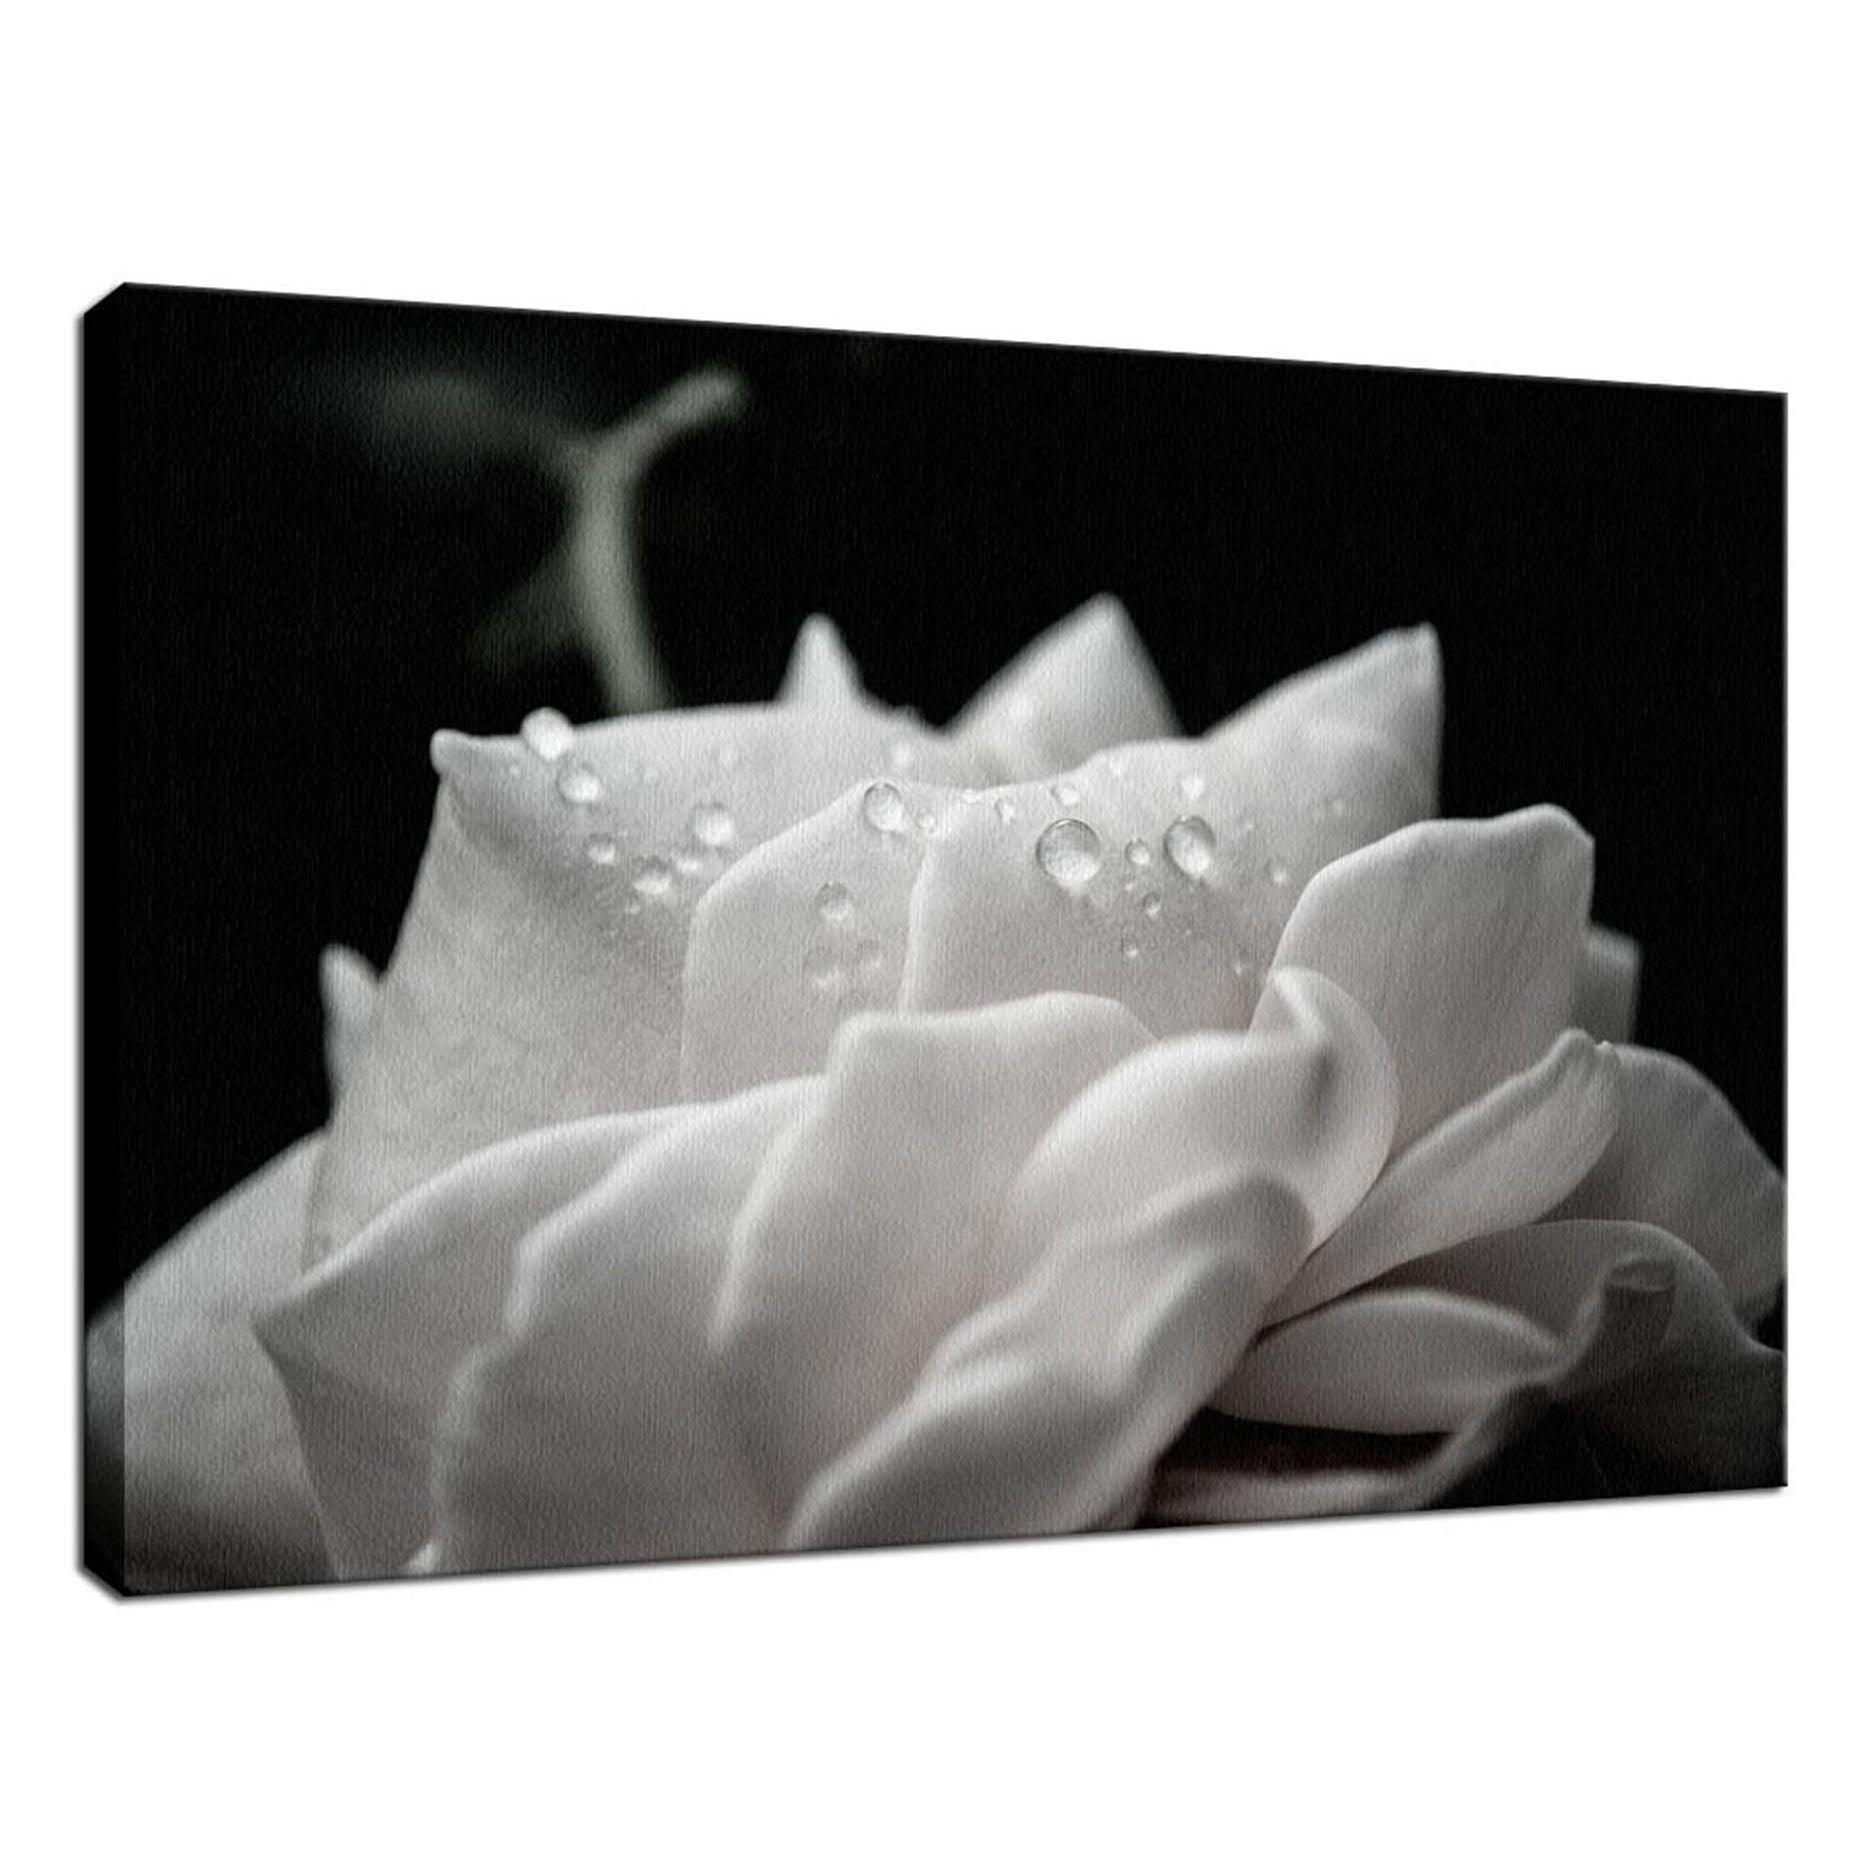 Delicate Rose with Water Droplets - Black and White - Nature / Floral Photo Fine Art Canvas Wall Art Prints  - PIPAFINEART